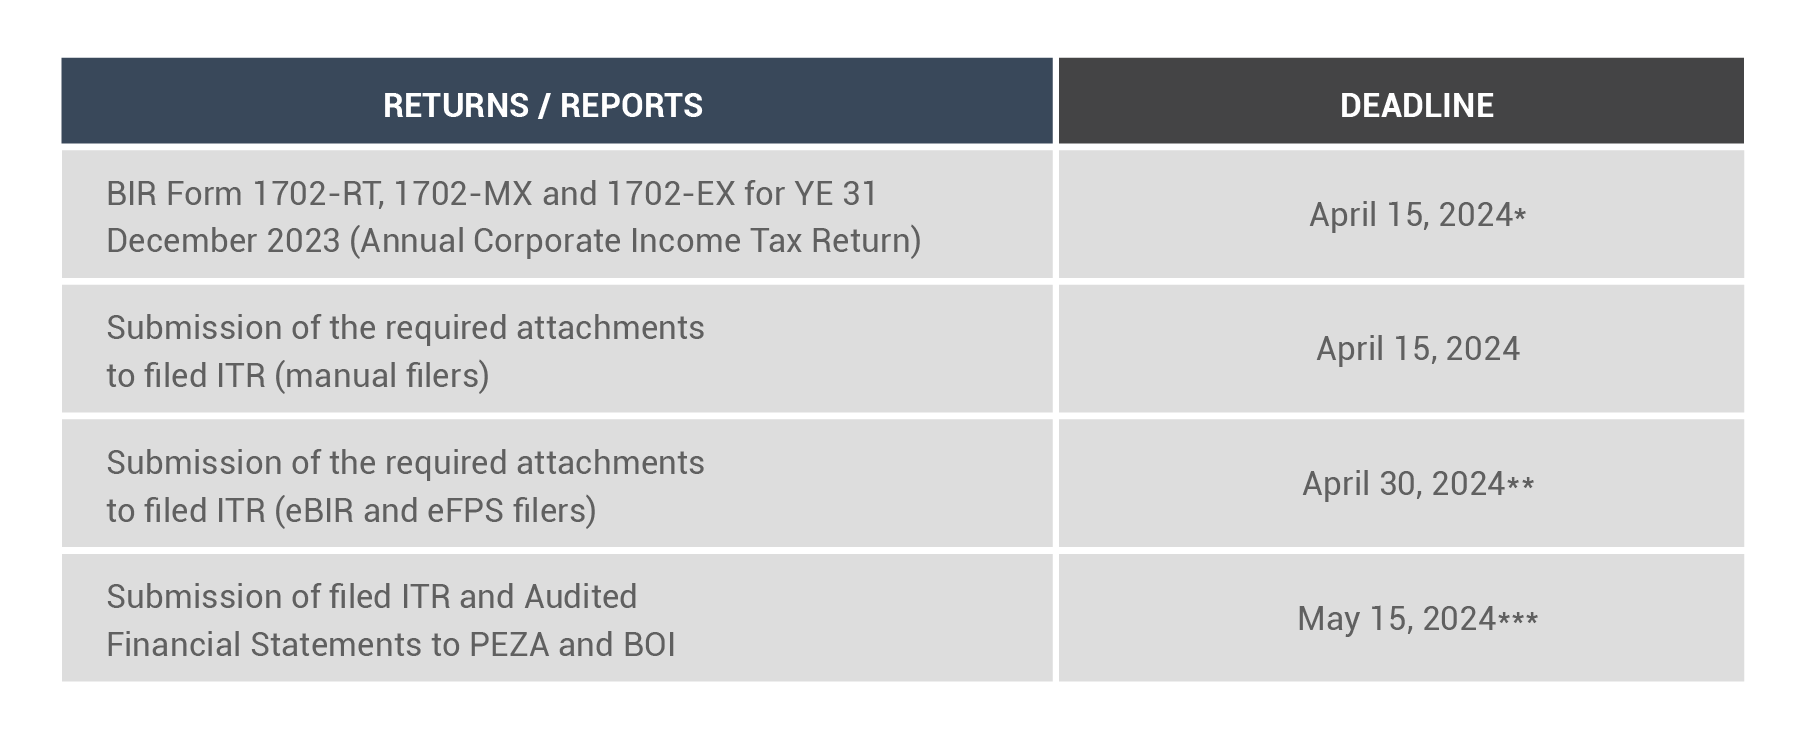 Annual Income Tax Returns, Audited Financial Statements and Other Reports